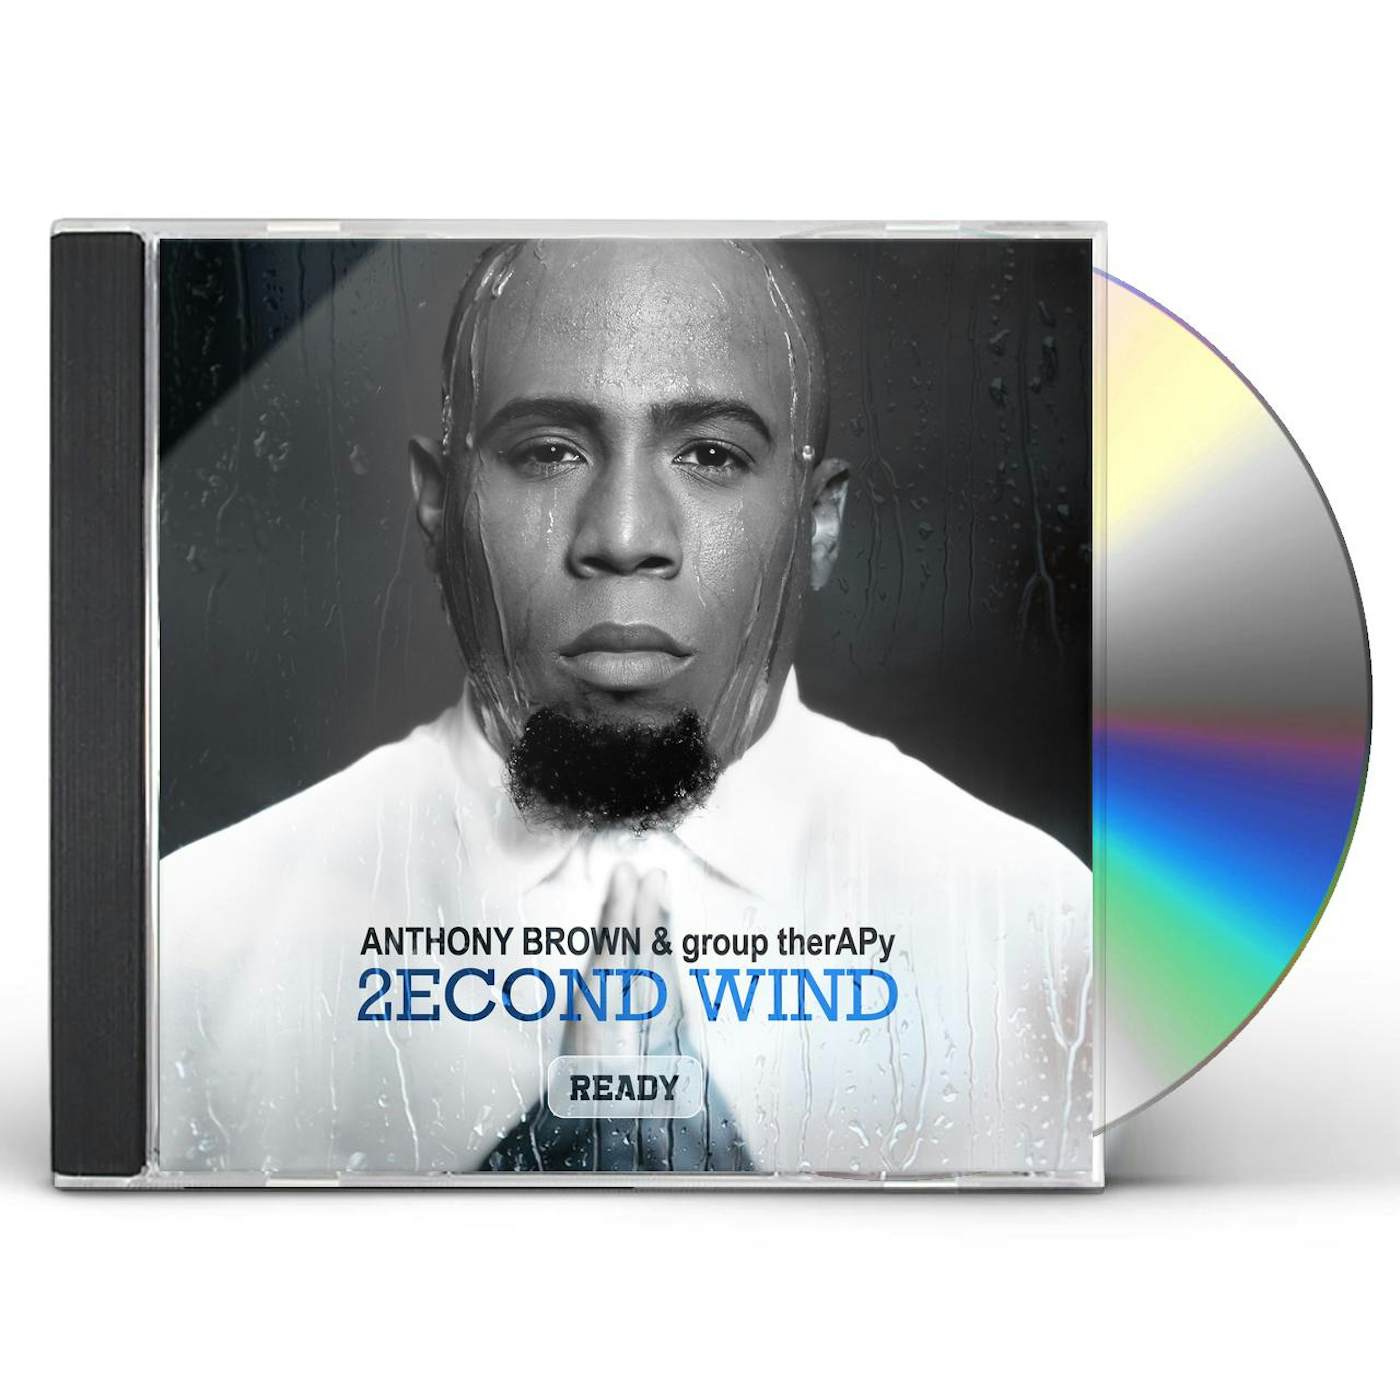 Anthony Brown & group therAPy 2ECOND WIND CD